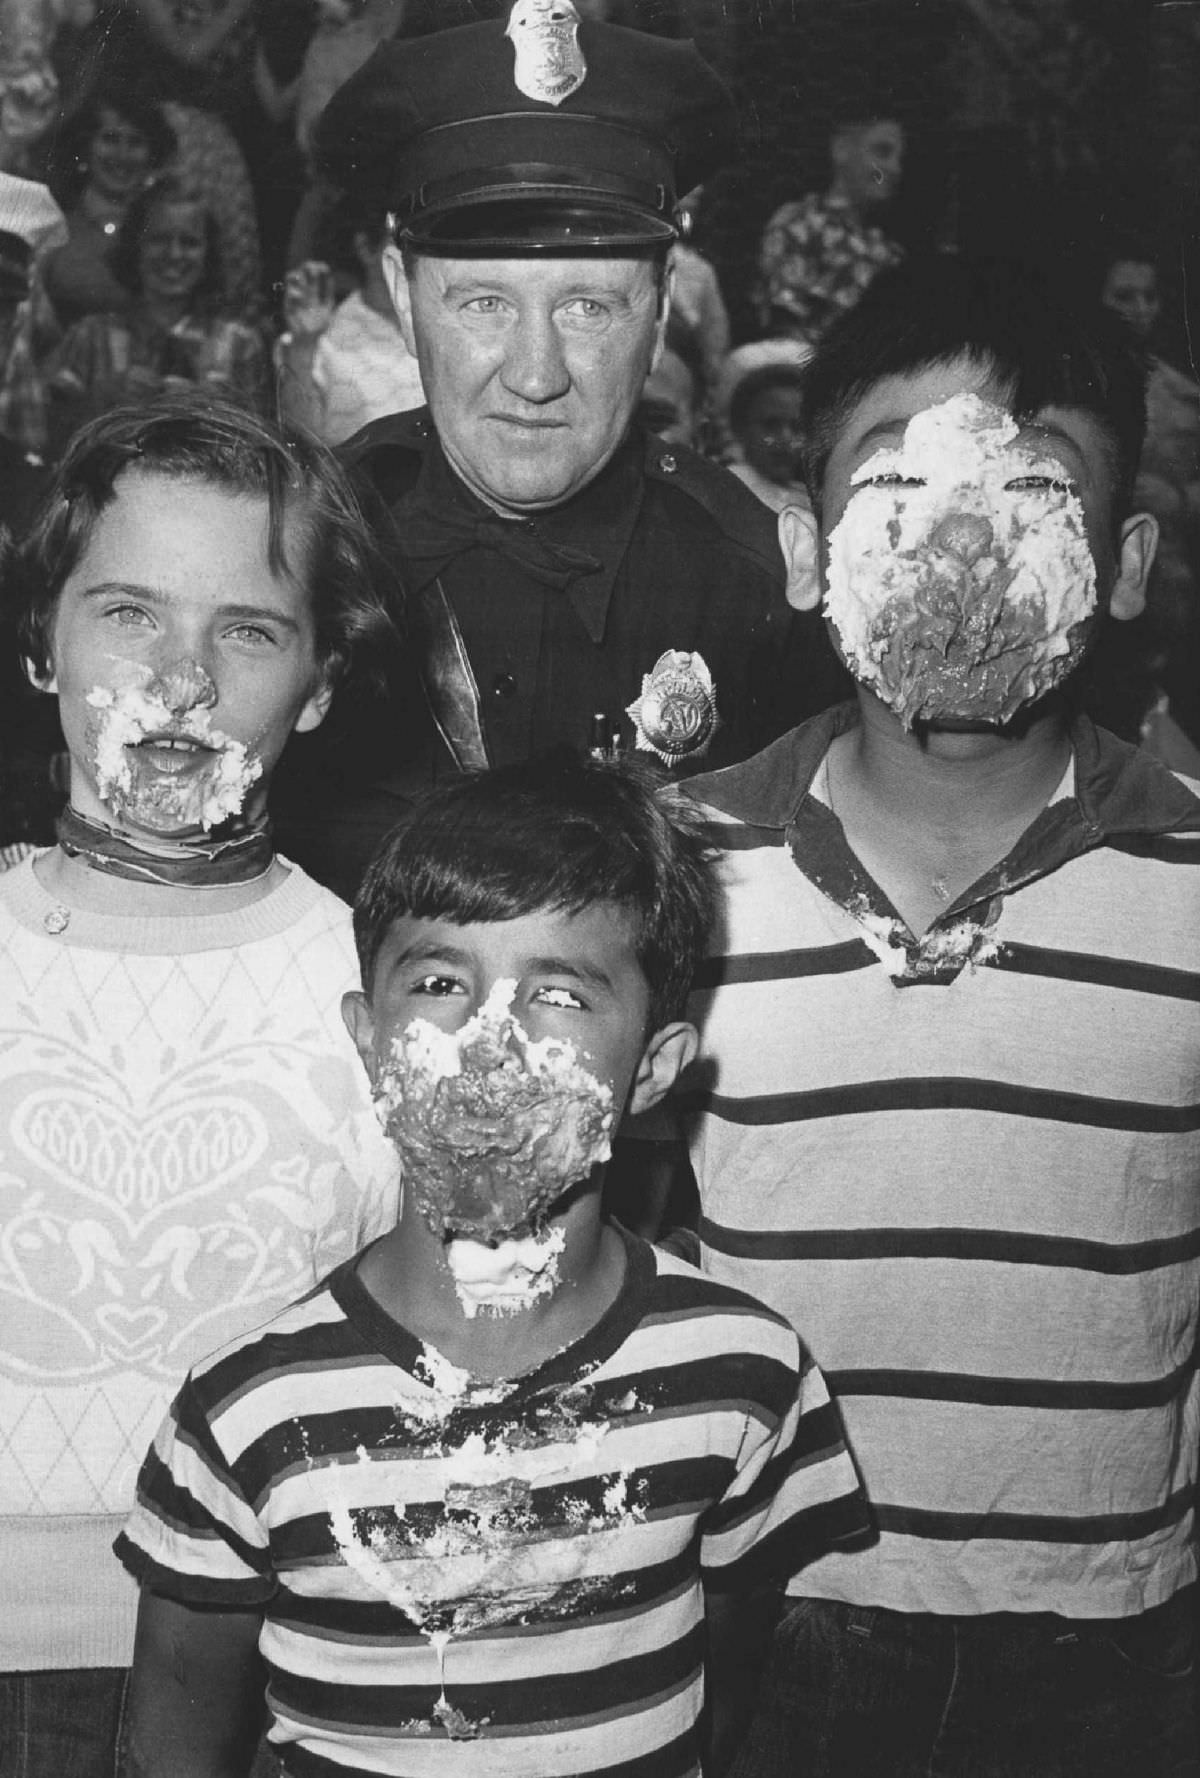 Denver Patrolman Joe Hale poses with the winners of a pie-eating contest, 1954.